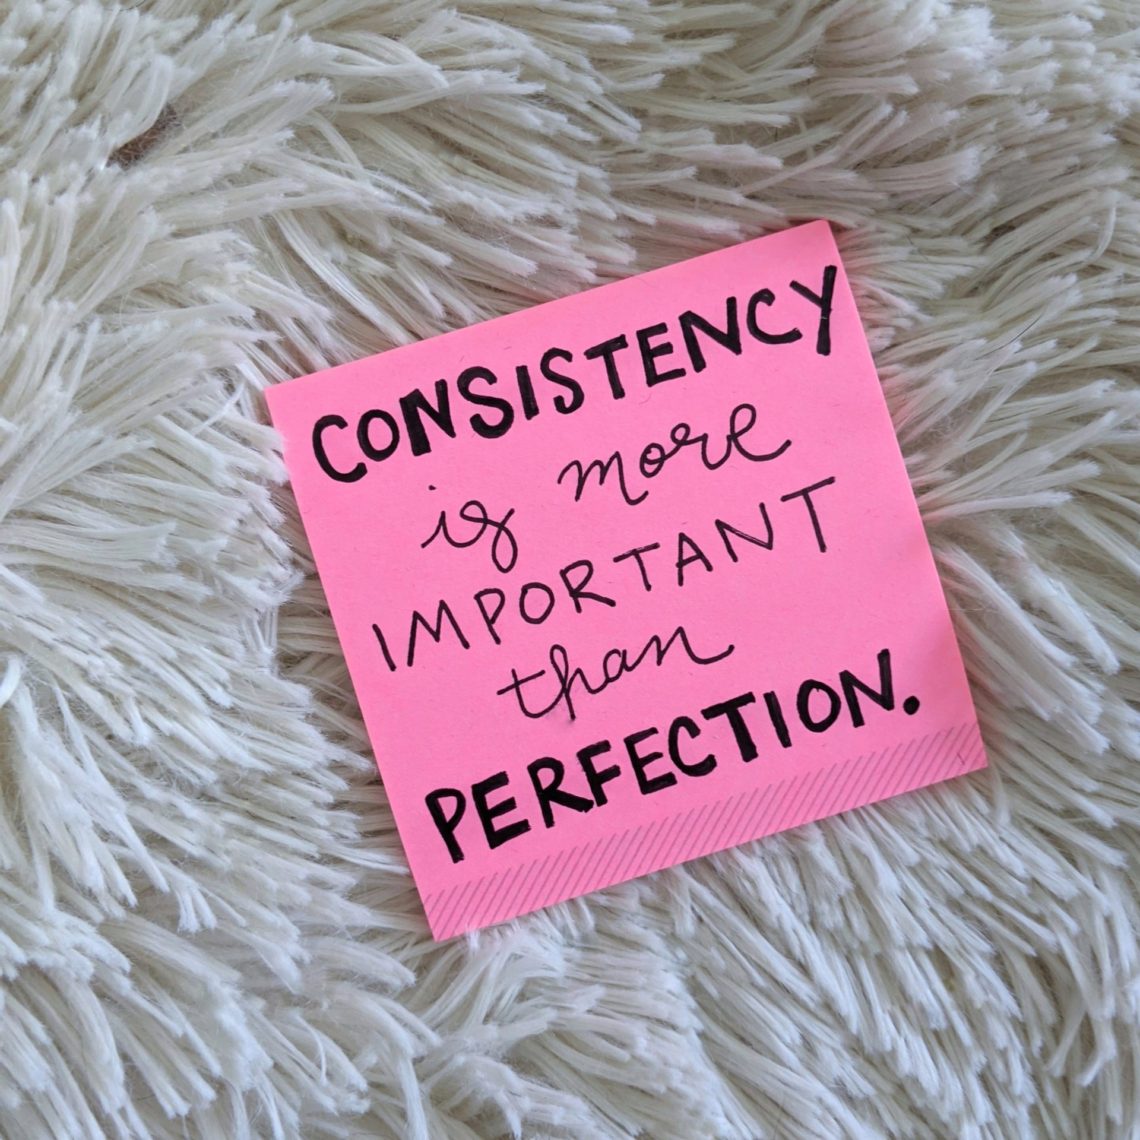 July's focus: Consistency – Let's Live and Learn